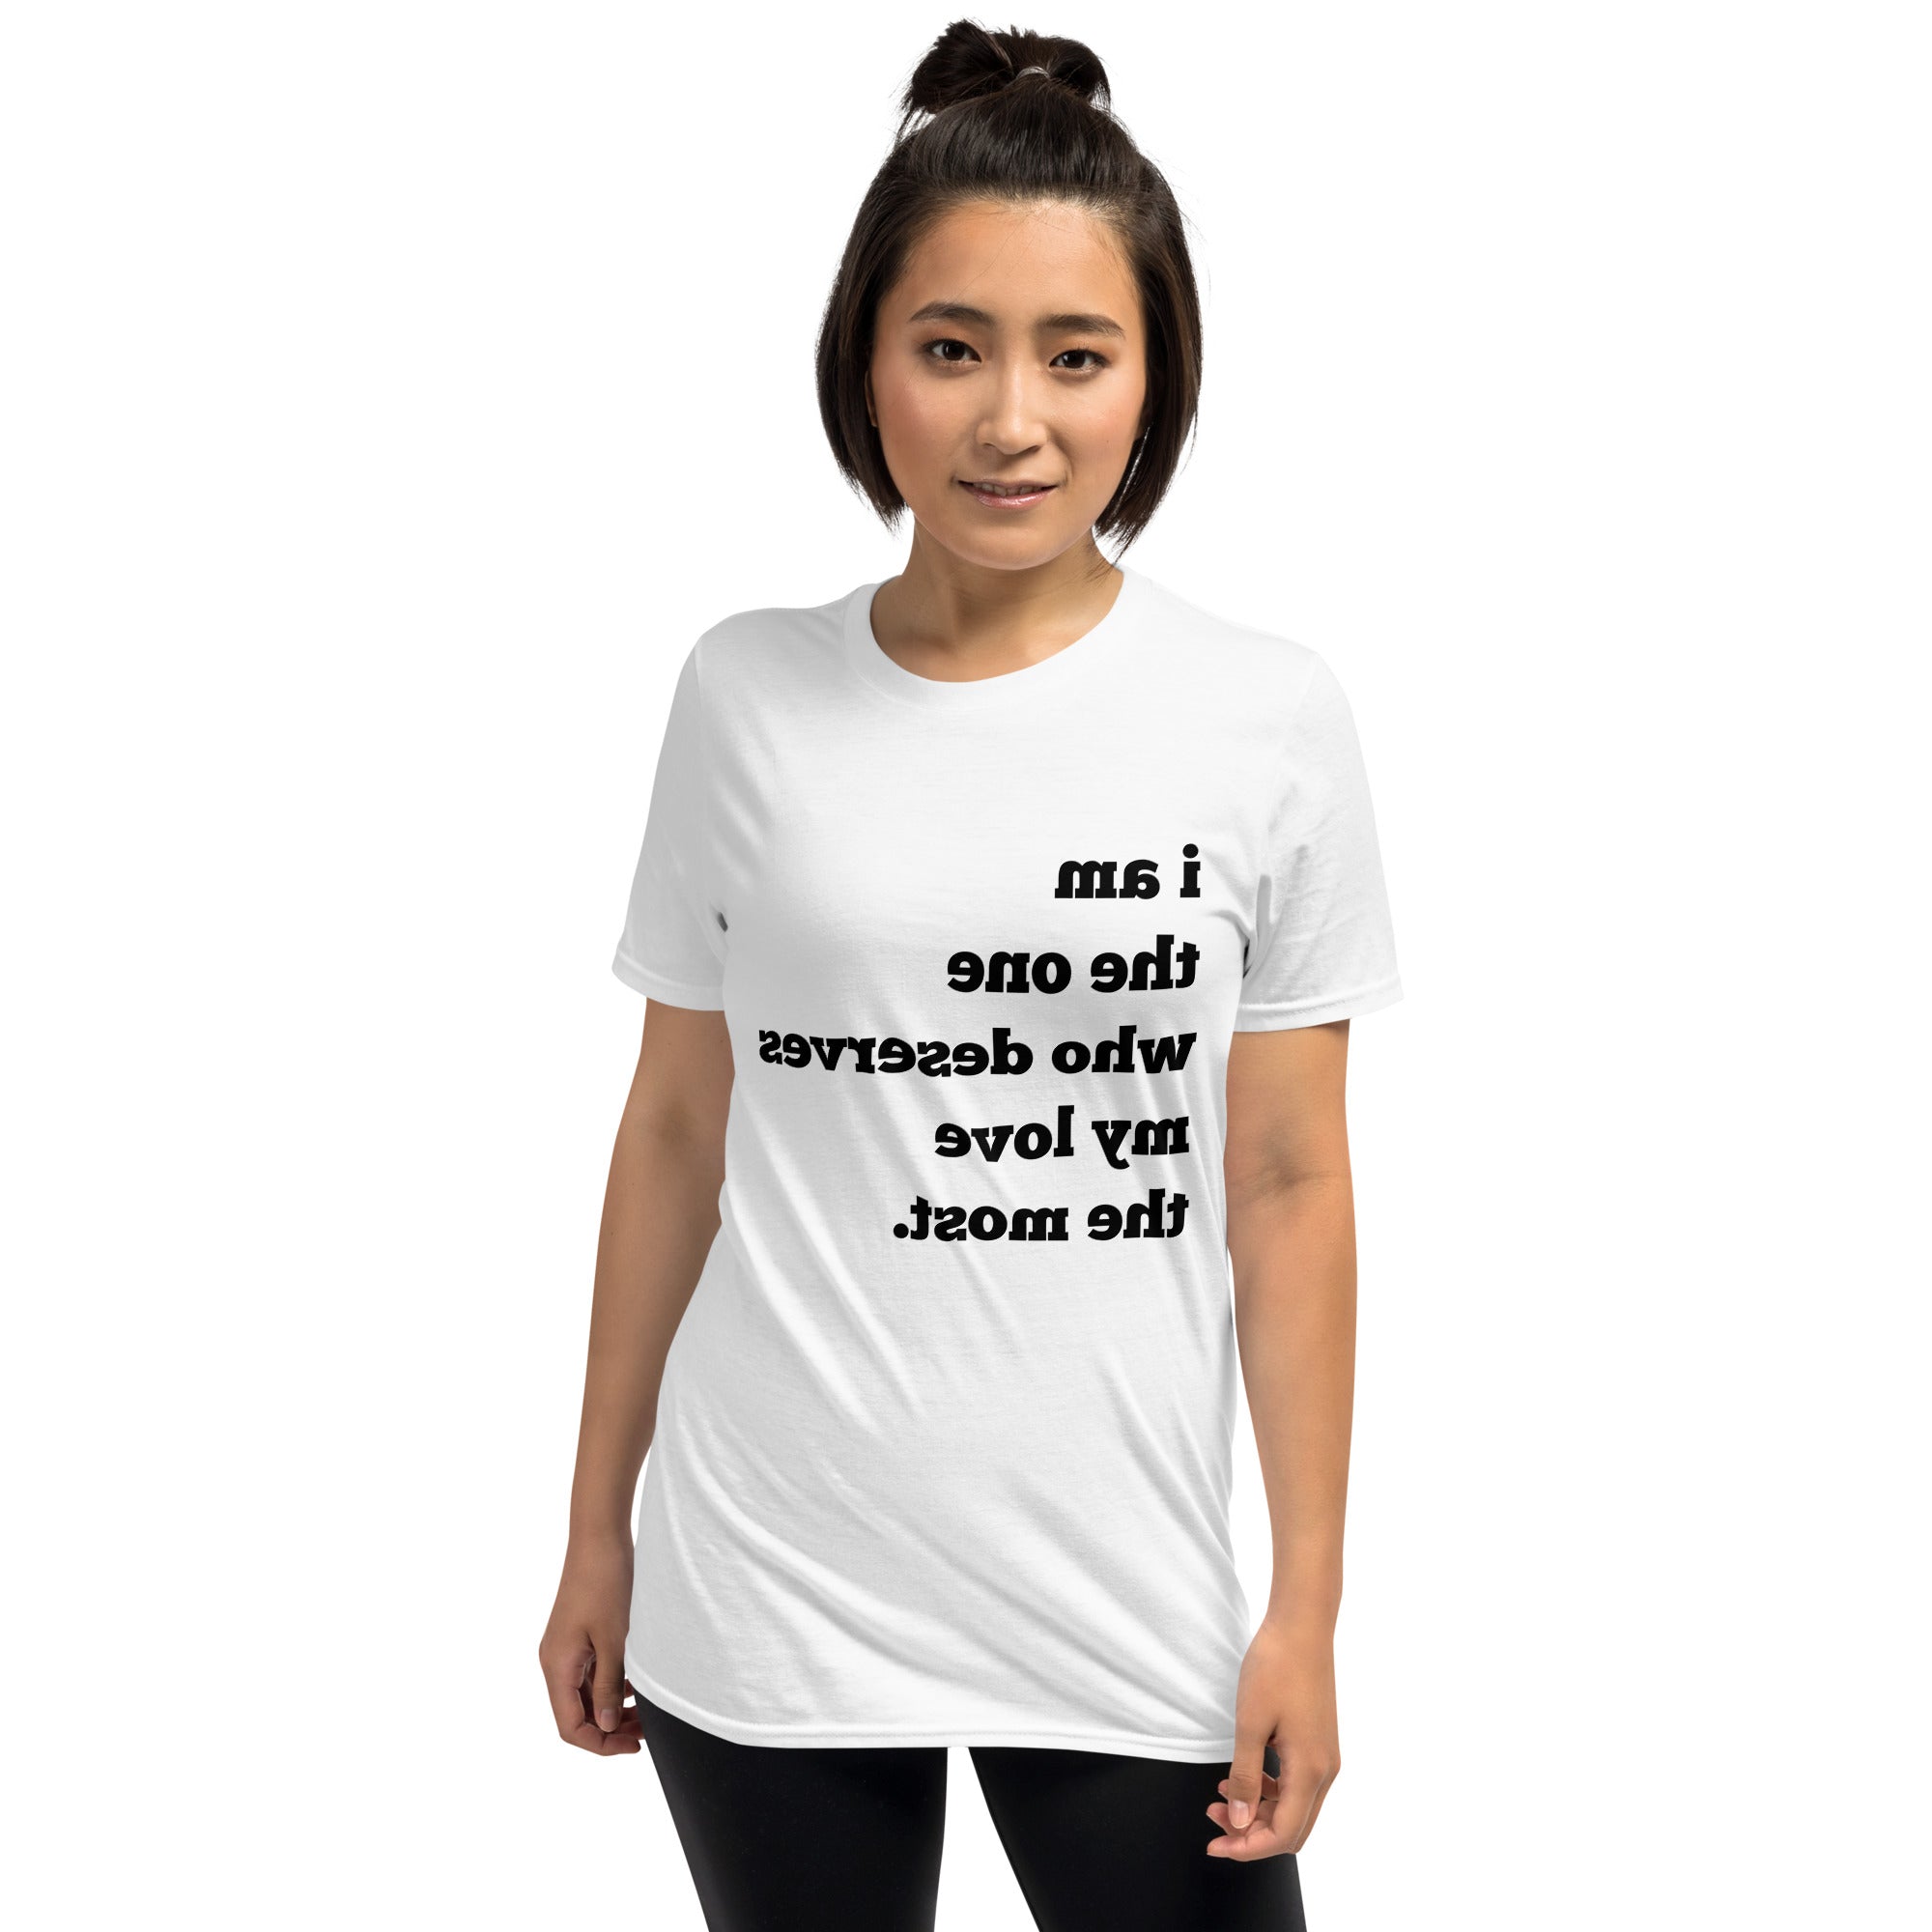 I AM THE ONE WHO DESERVES MY LOVE THE MOST Mirror Affirmation Tee (White, Short-Sleeve)